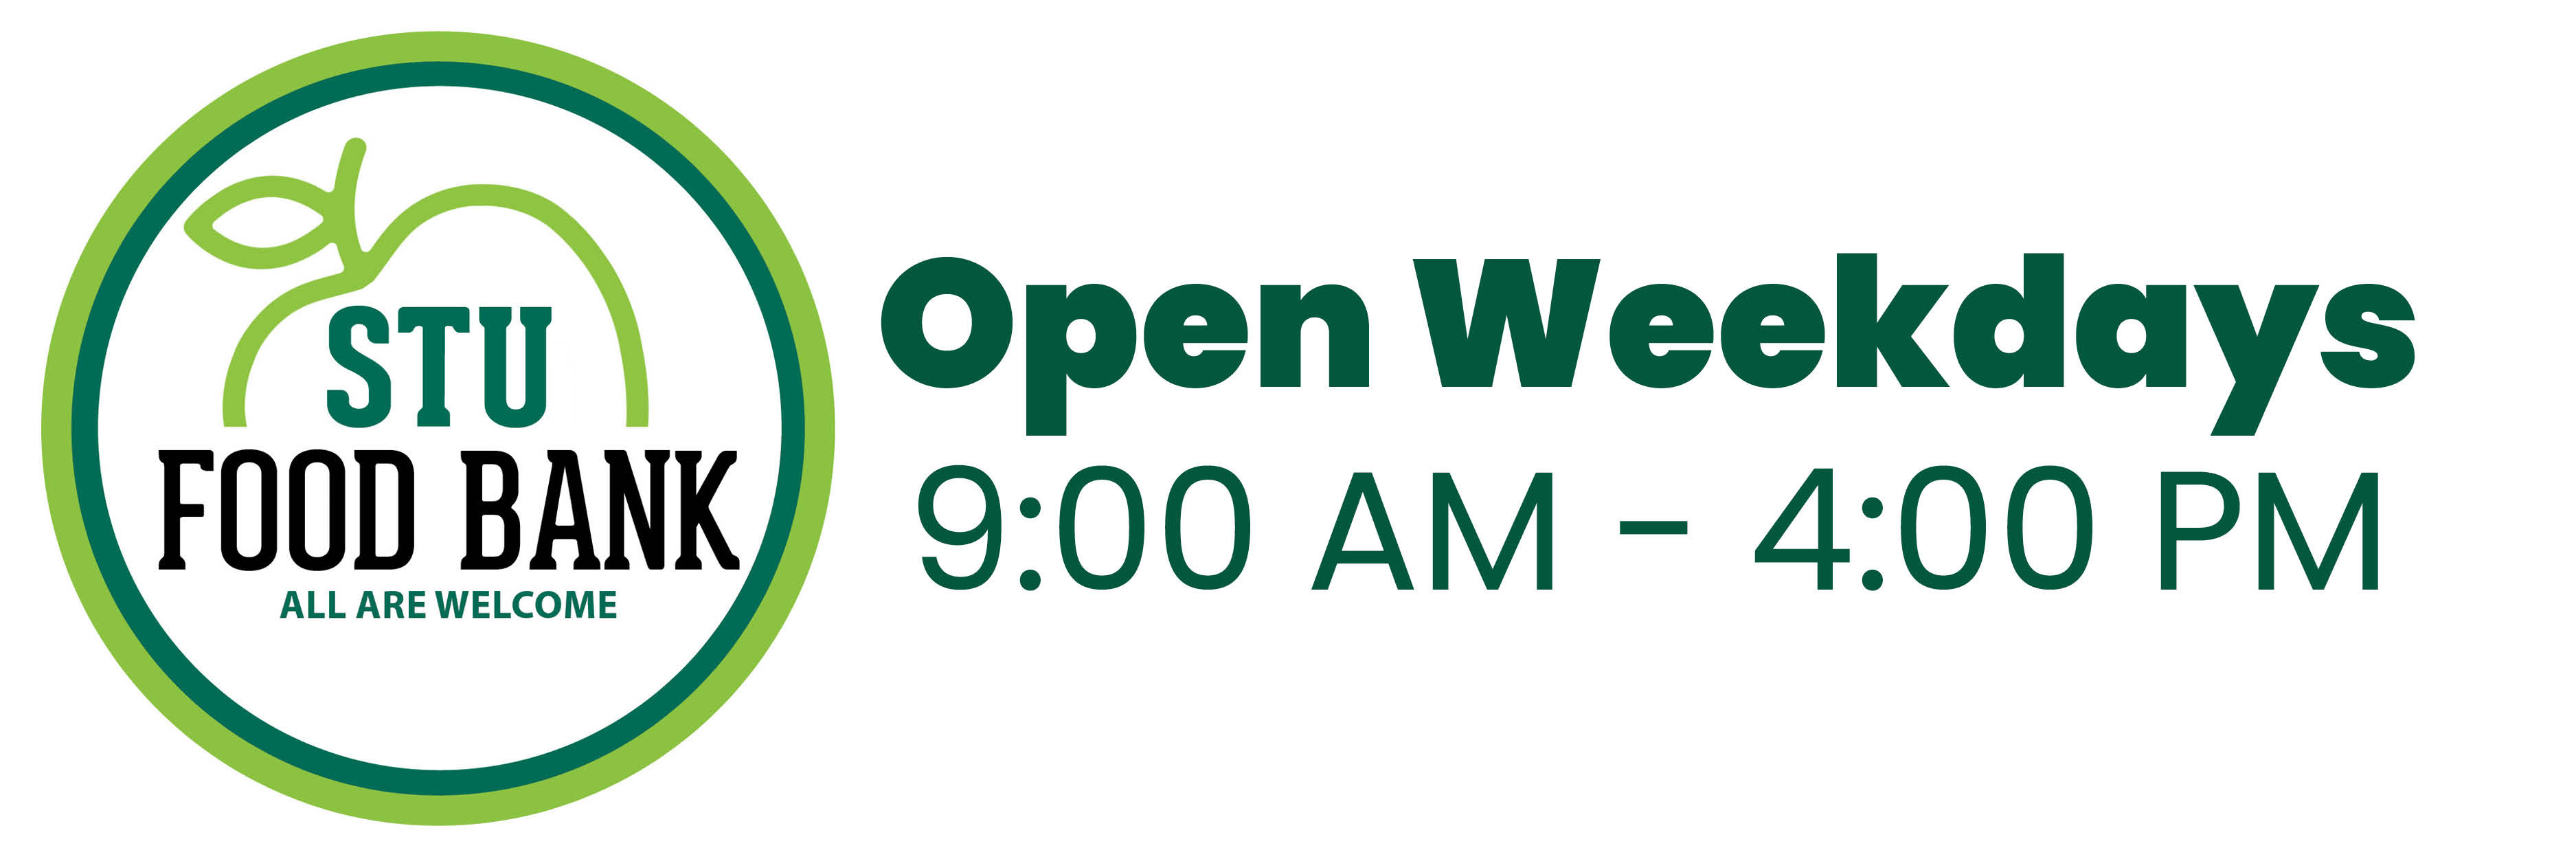 Food Bank Open 9am to 4 pm